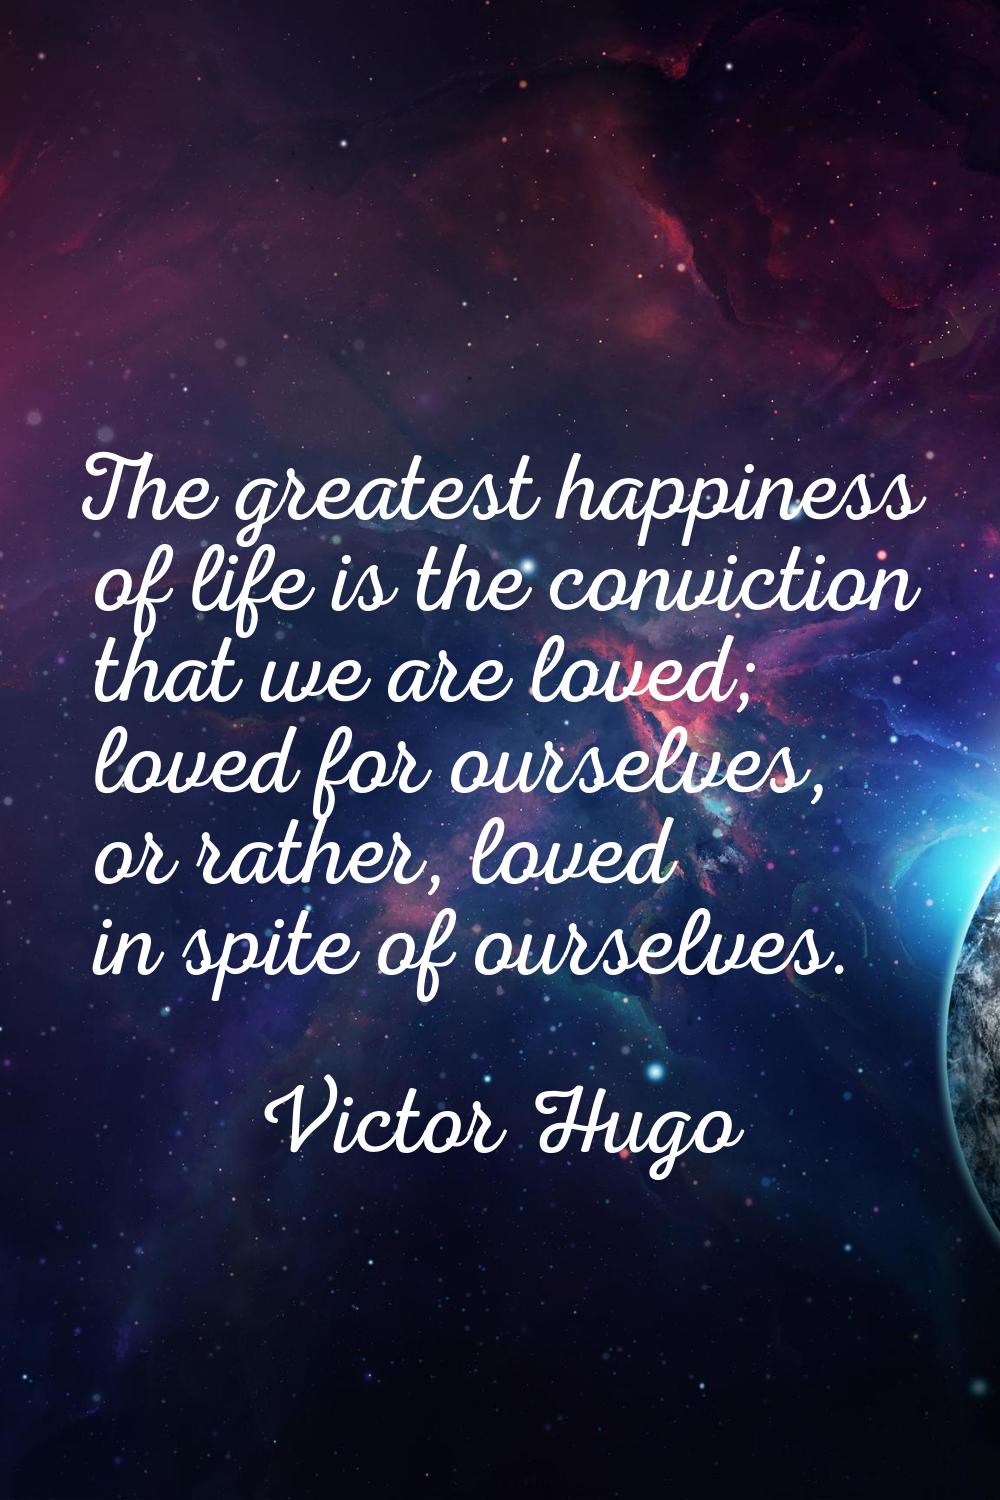 The greatest happiness of life is the conviction that we are loved; loved for ourselves, or rather,